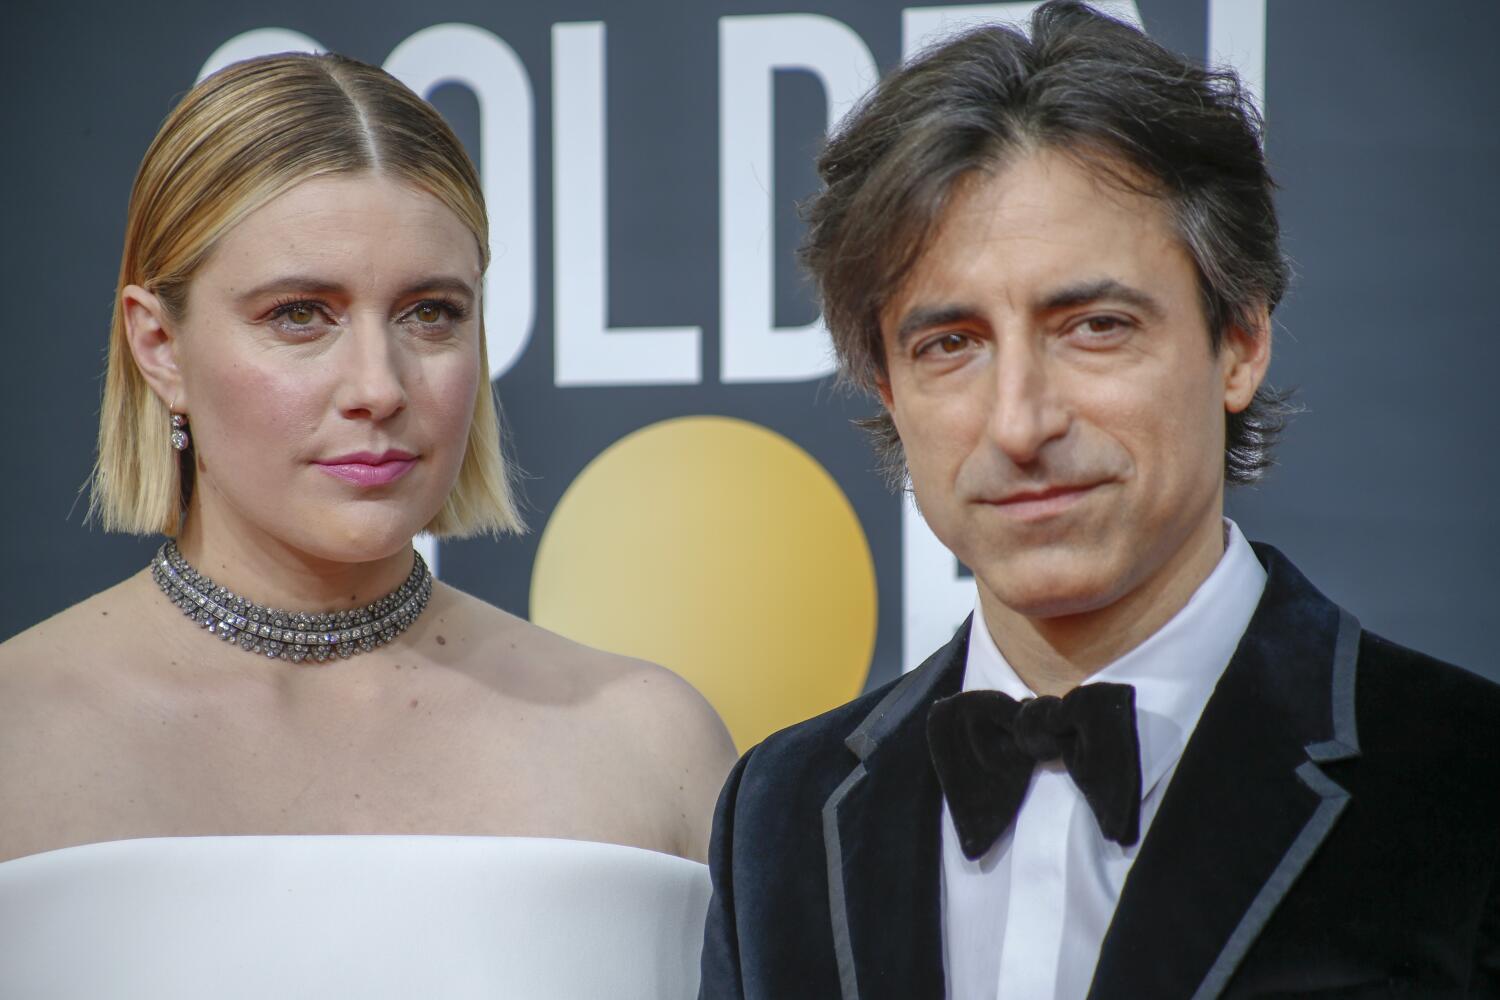 This Barbie is married: Greta Gerwig and Noah Baumbach wed after 12 years together